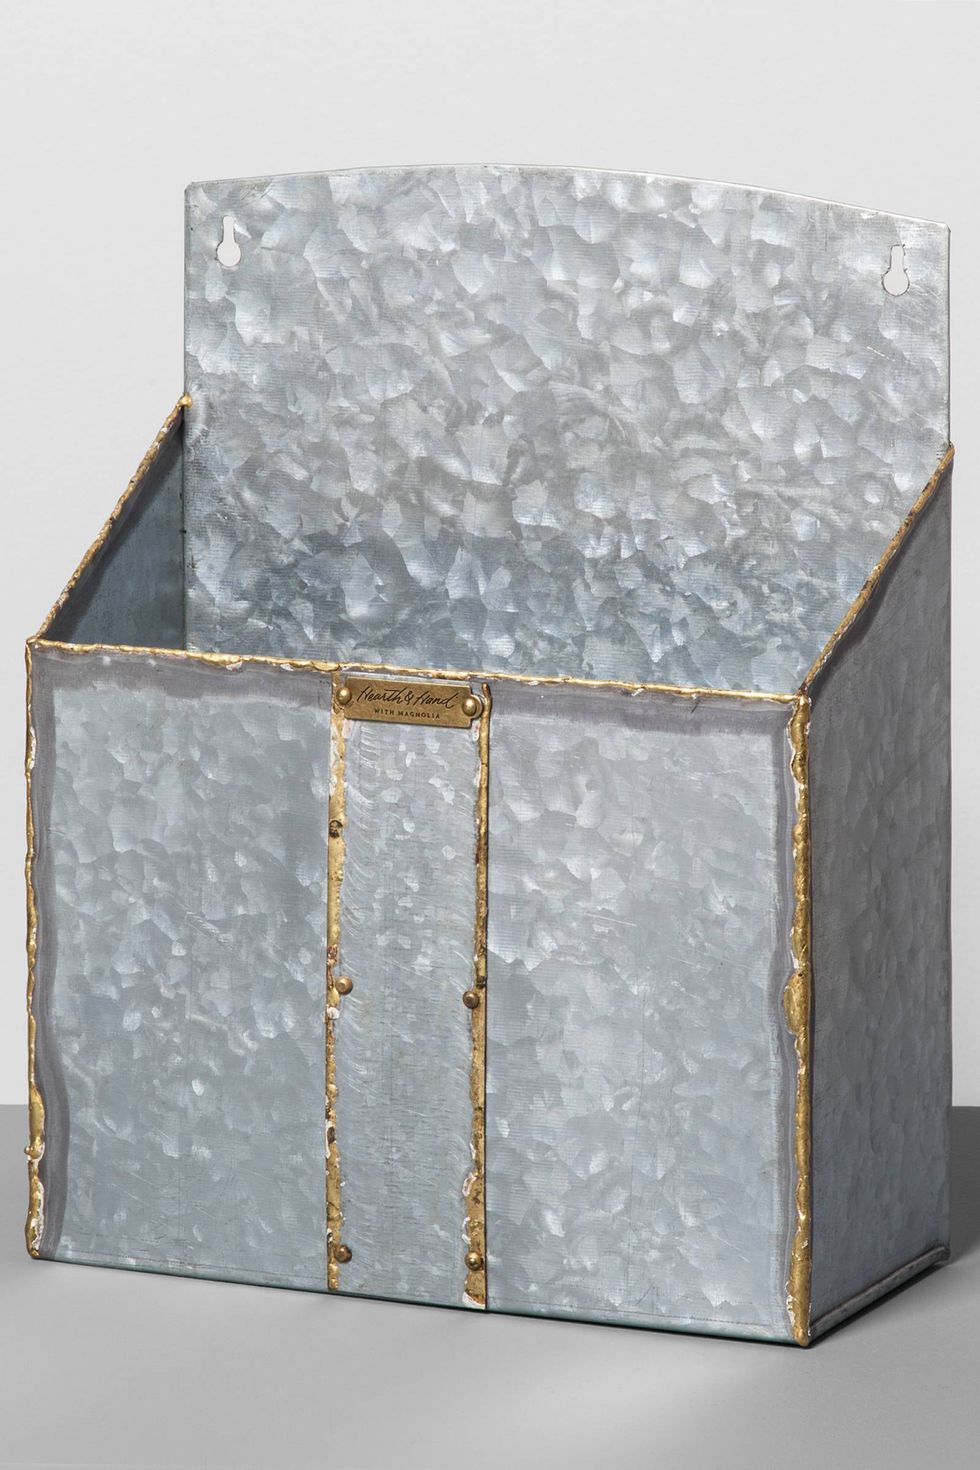 Box, Rectangle, Marble, Metal, Silver, 